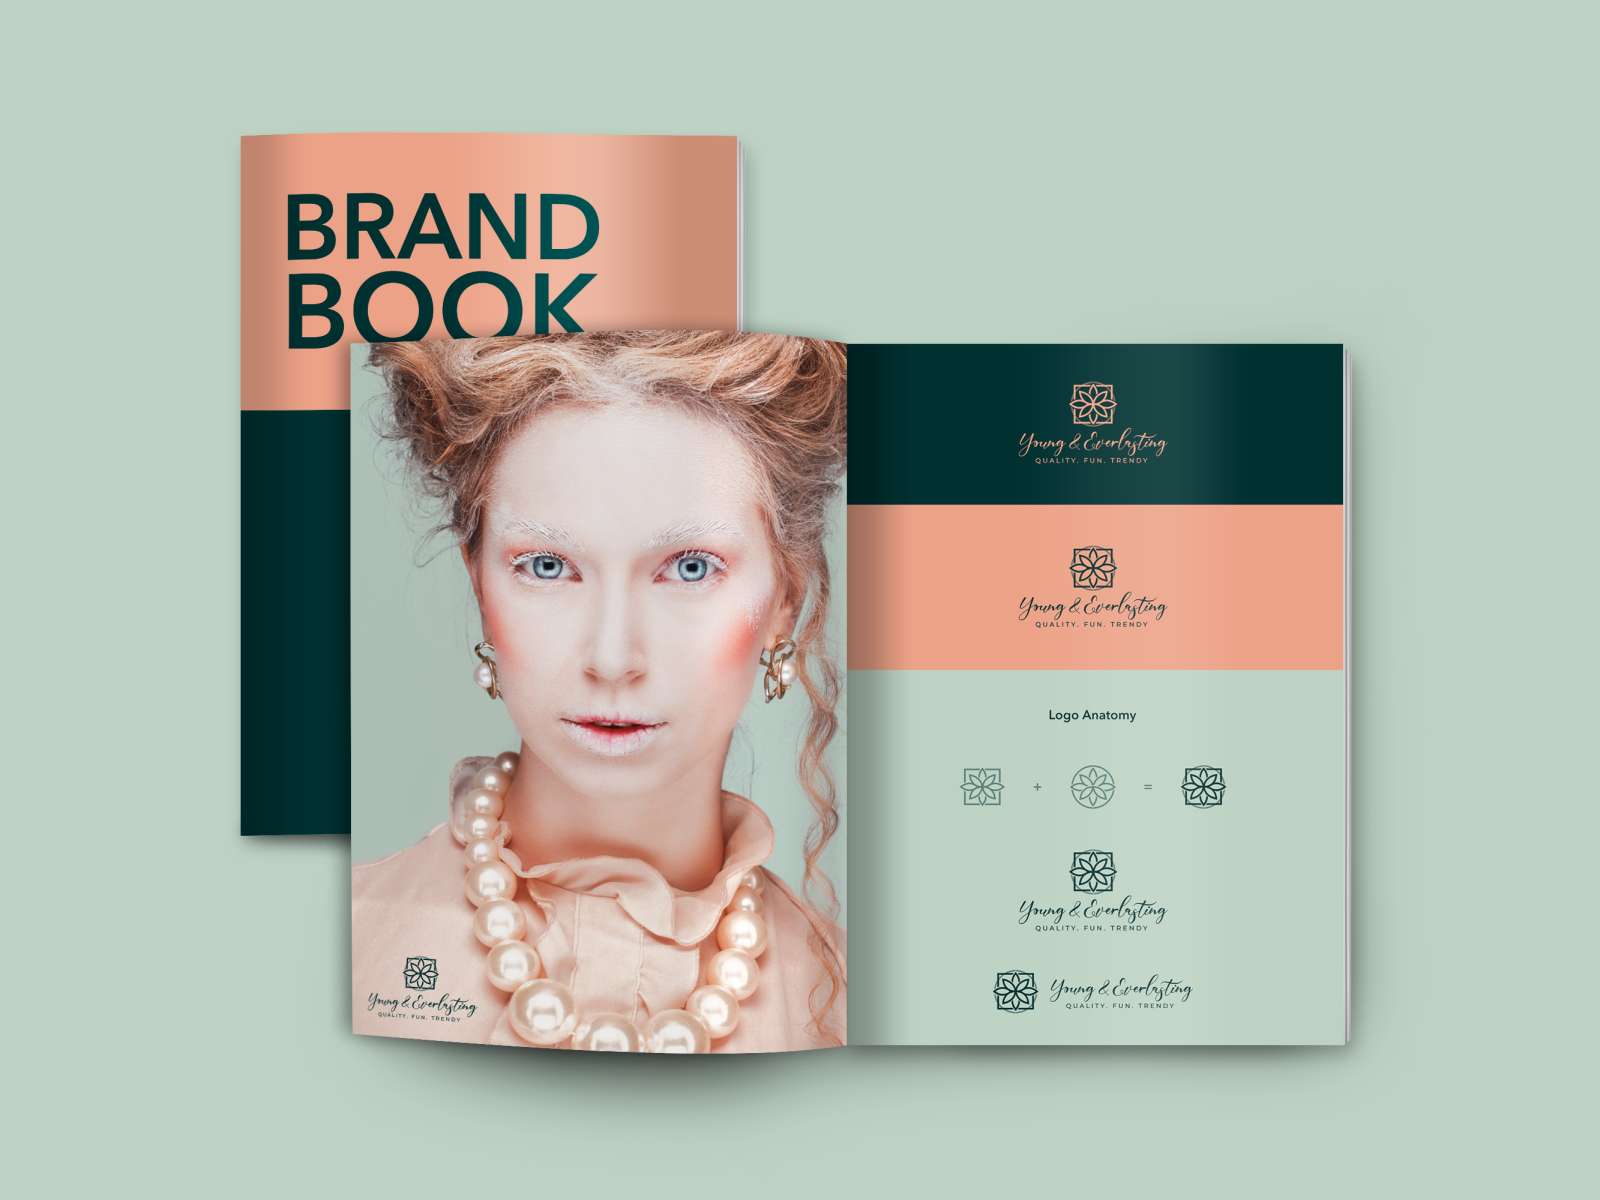 Brand Book by Lissan Haider on Dribbble